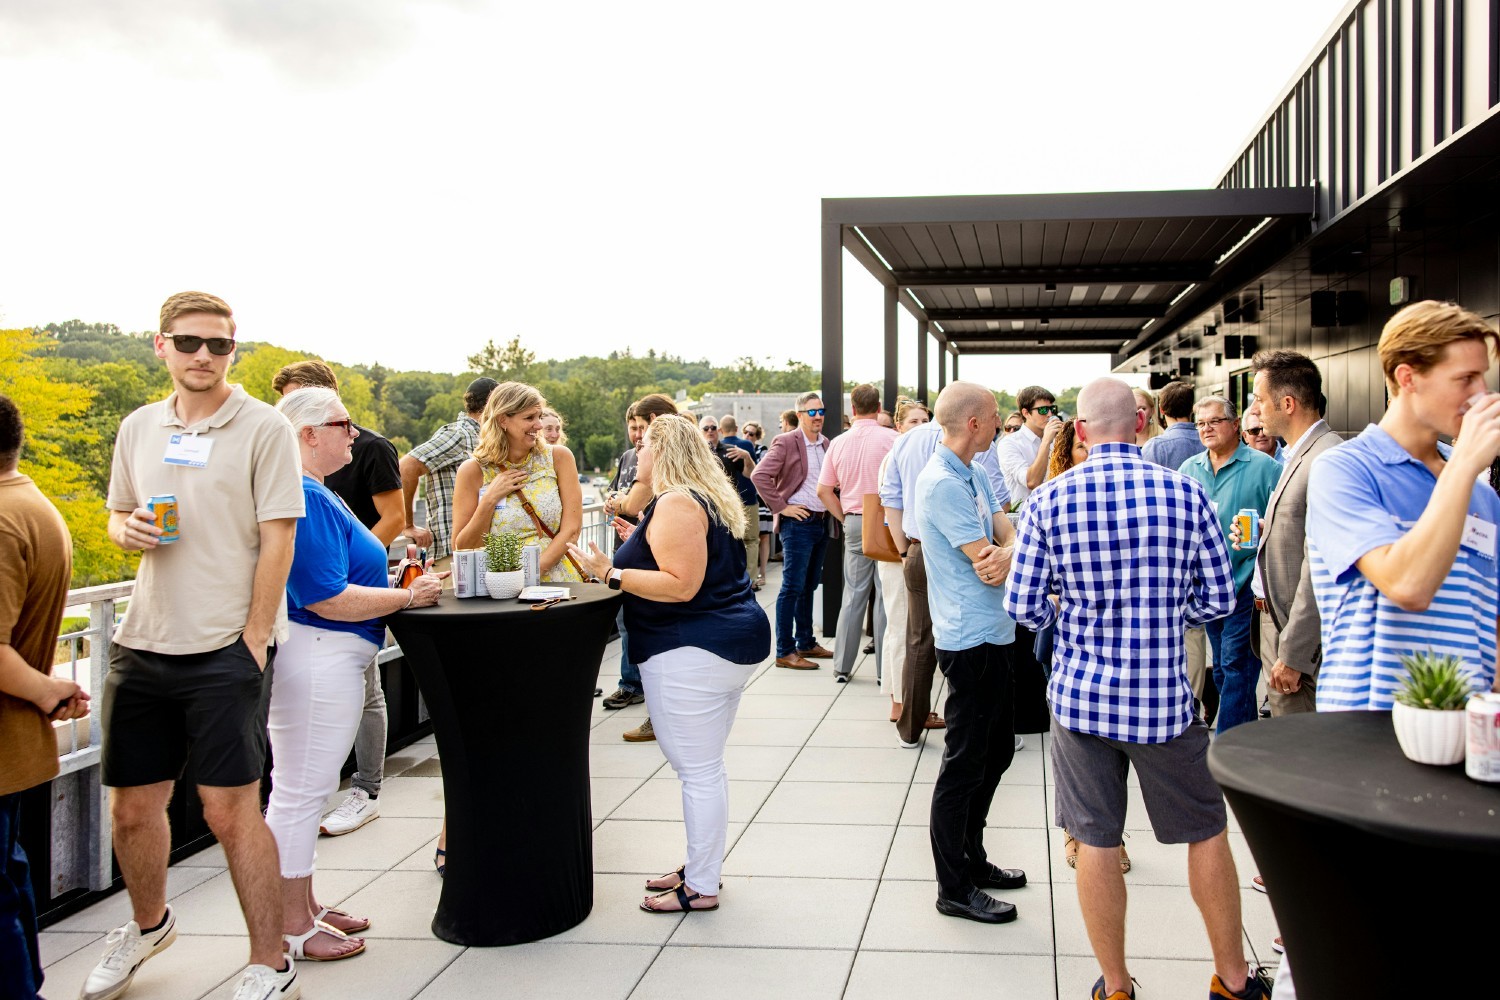 Every summer, MichiganLabs hosts a 300+ person networking event, Drinks on the Deck, on their 1,888 SF roof-top patio.